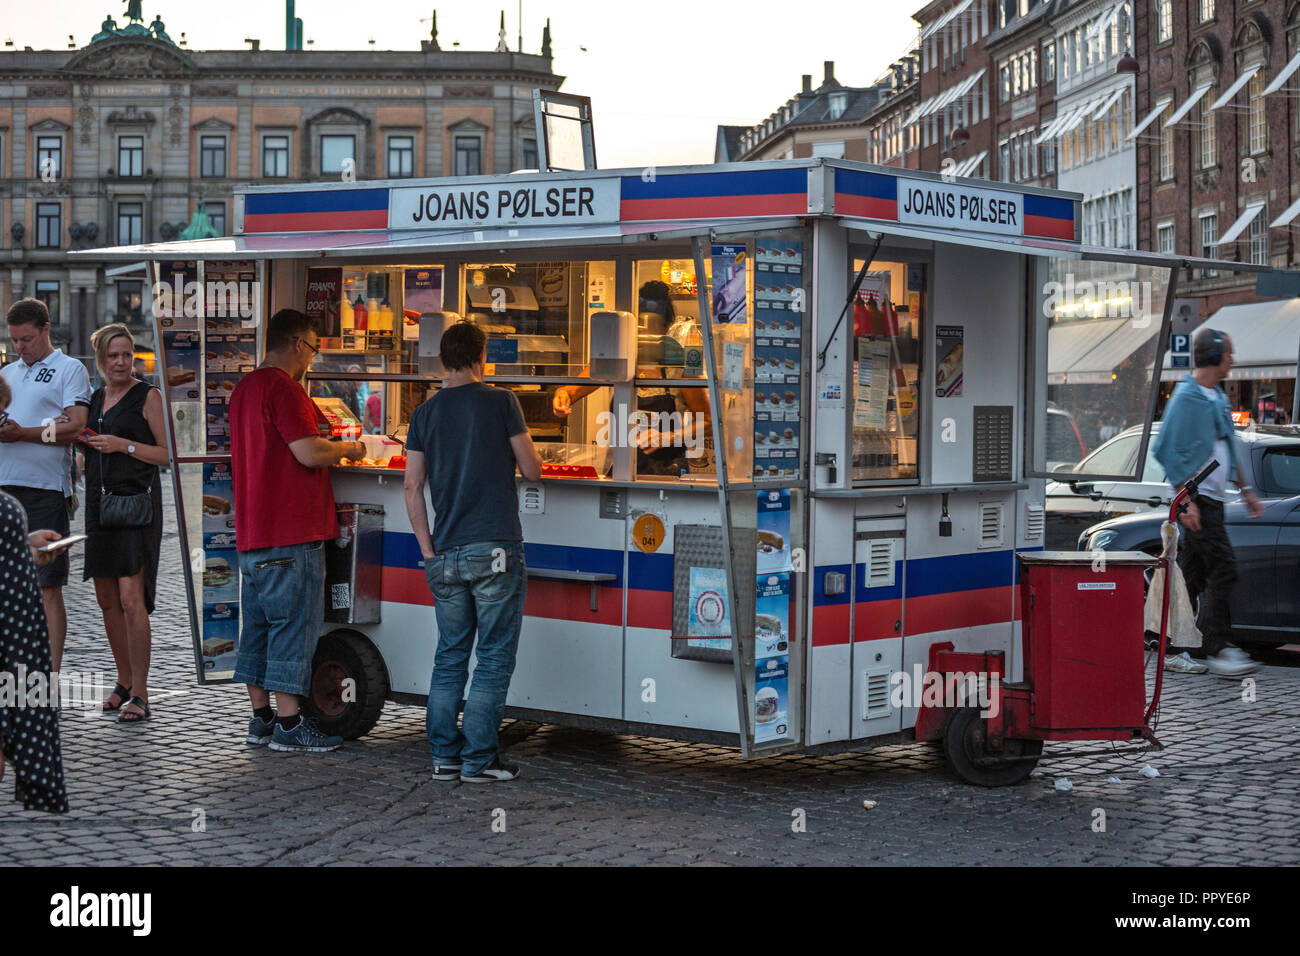 typical and classic Danish pølsevogn, hot dog stand Stock Photo